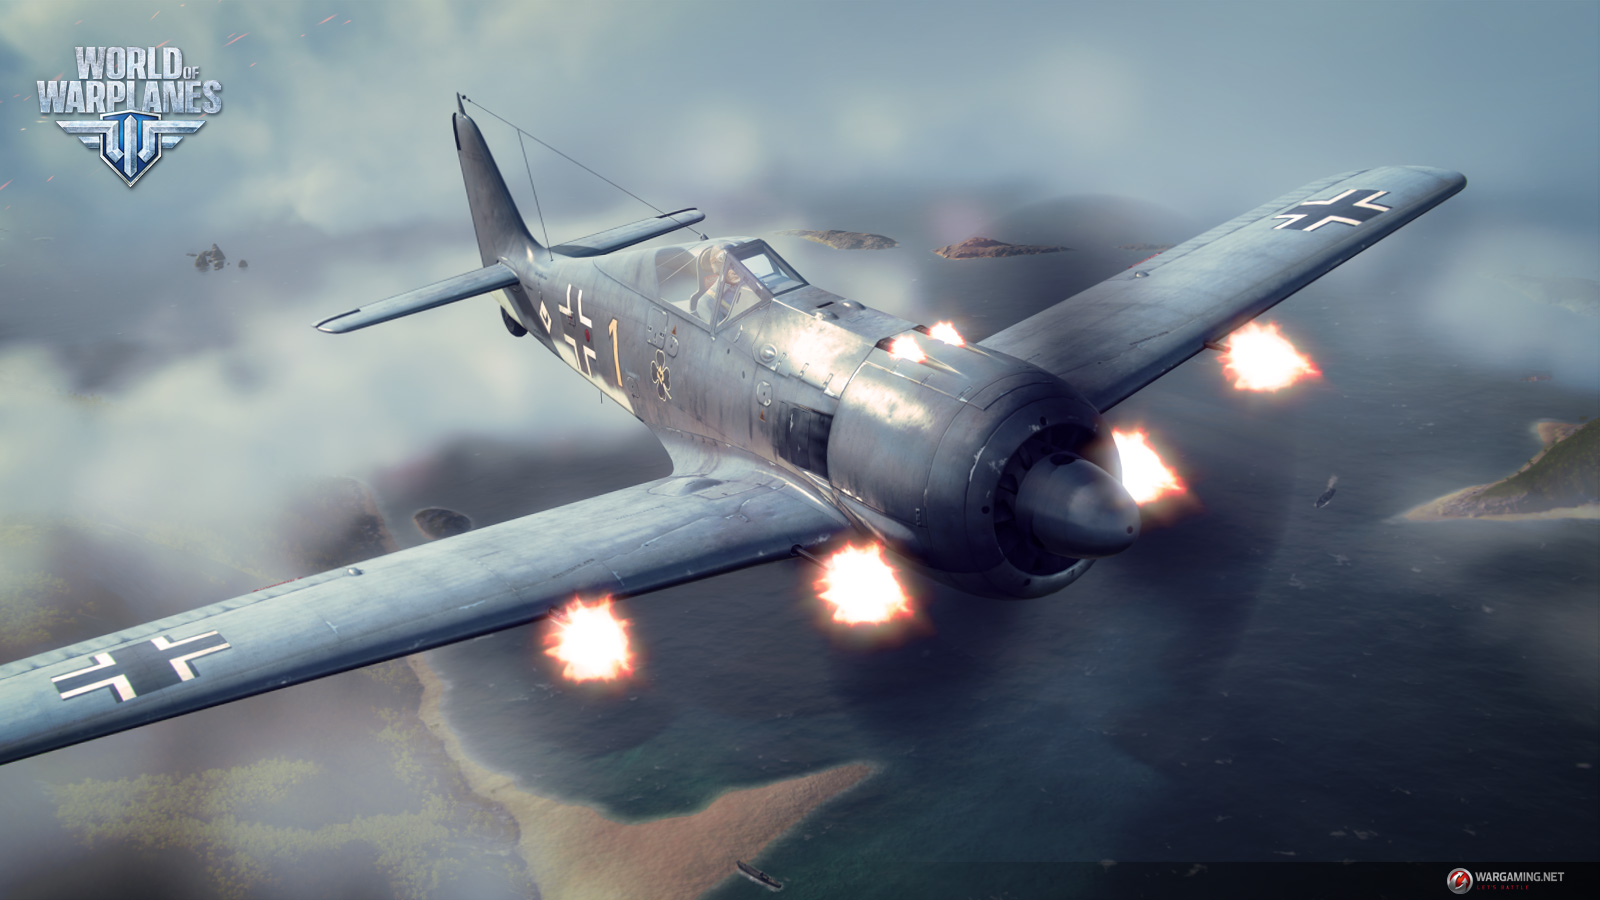 Focke-Wulf Fw 190 Backgrounds, Compatible - PC, Mobile, Gadgets| 1600x900 px